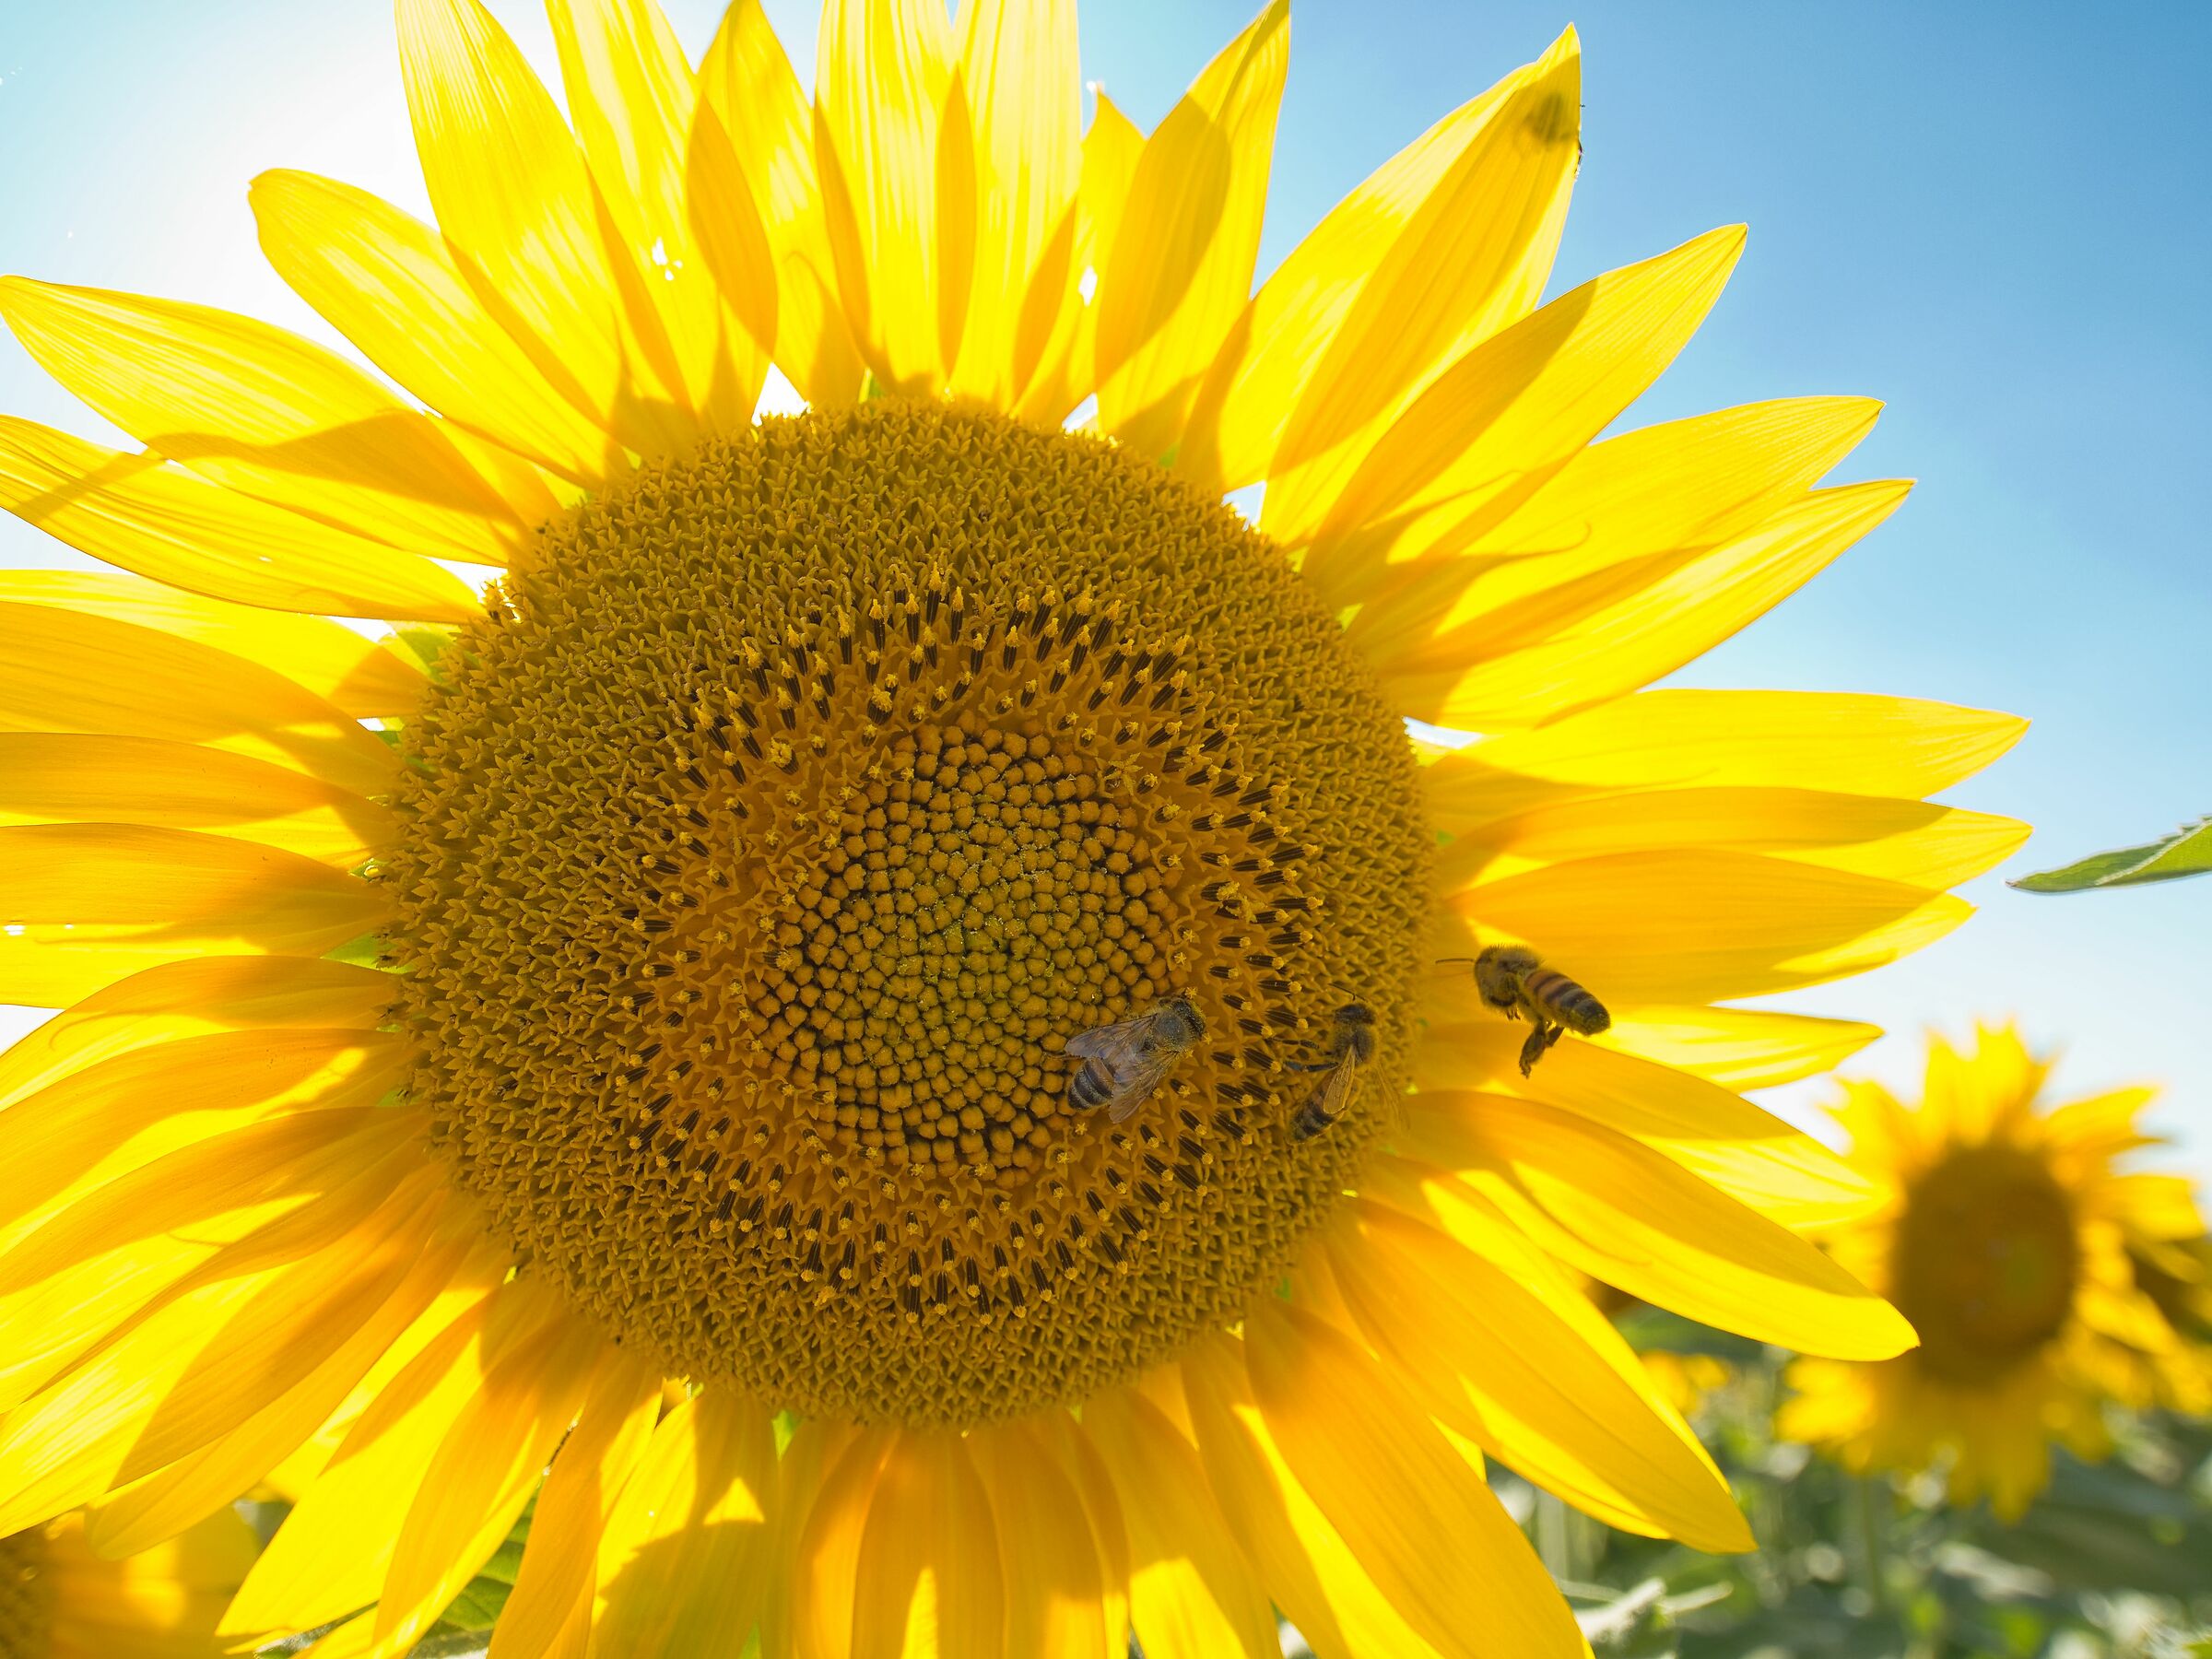 Bees and sunflower...